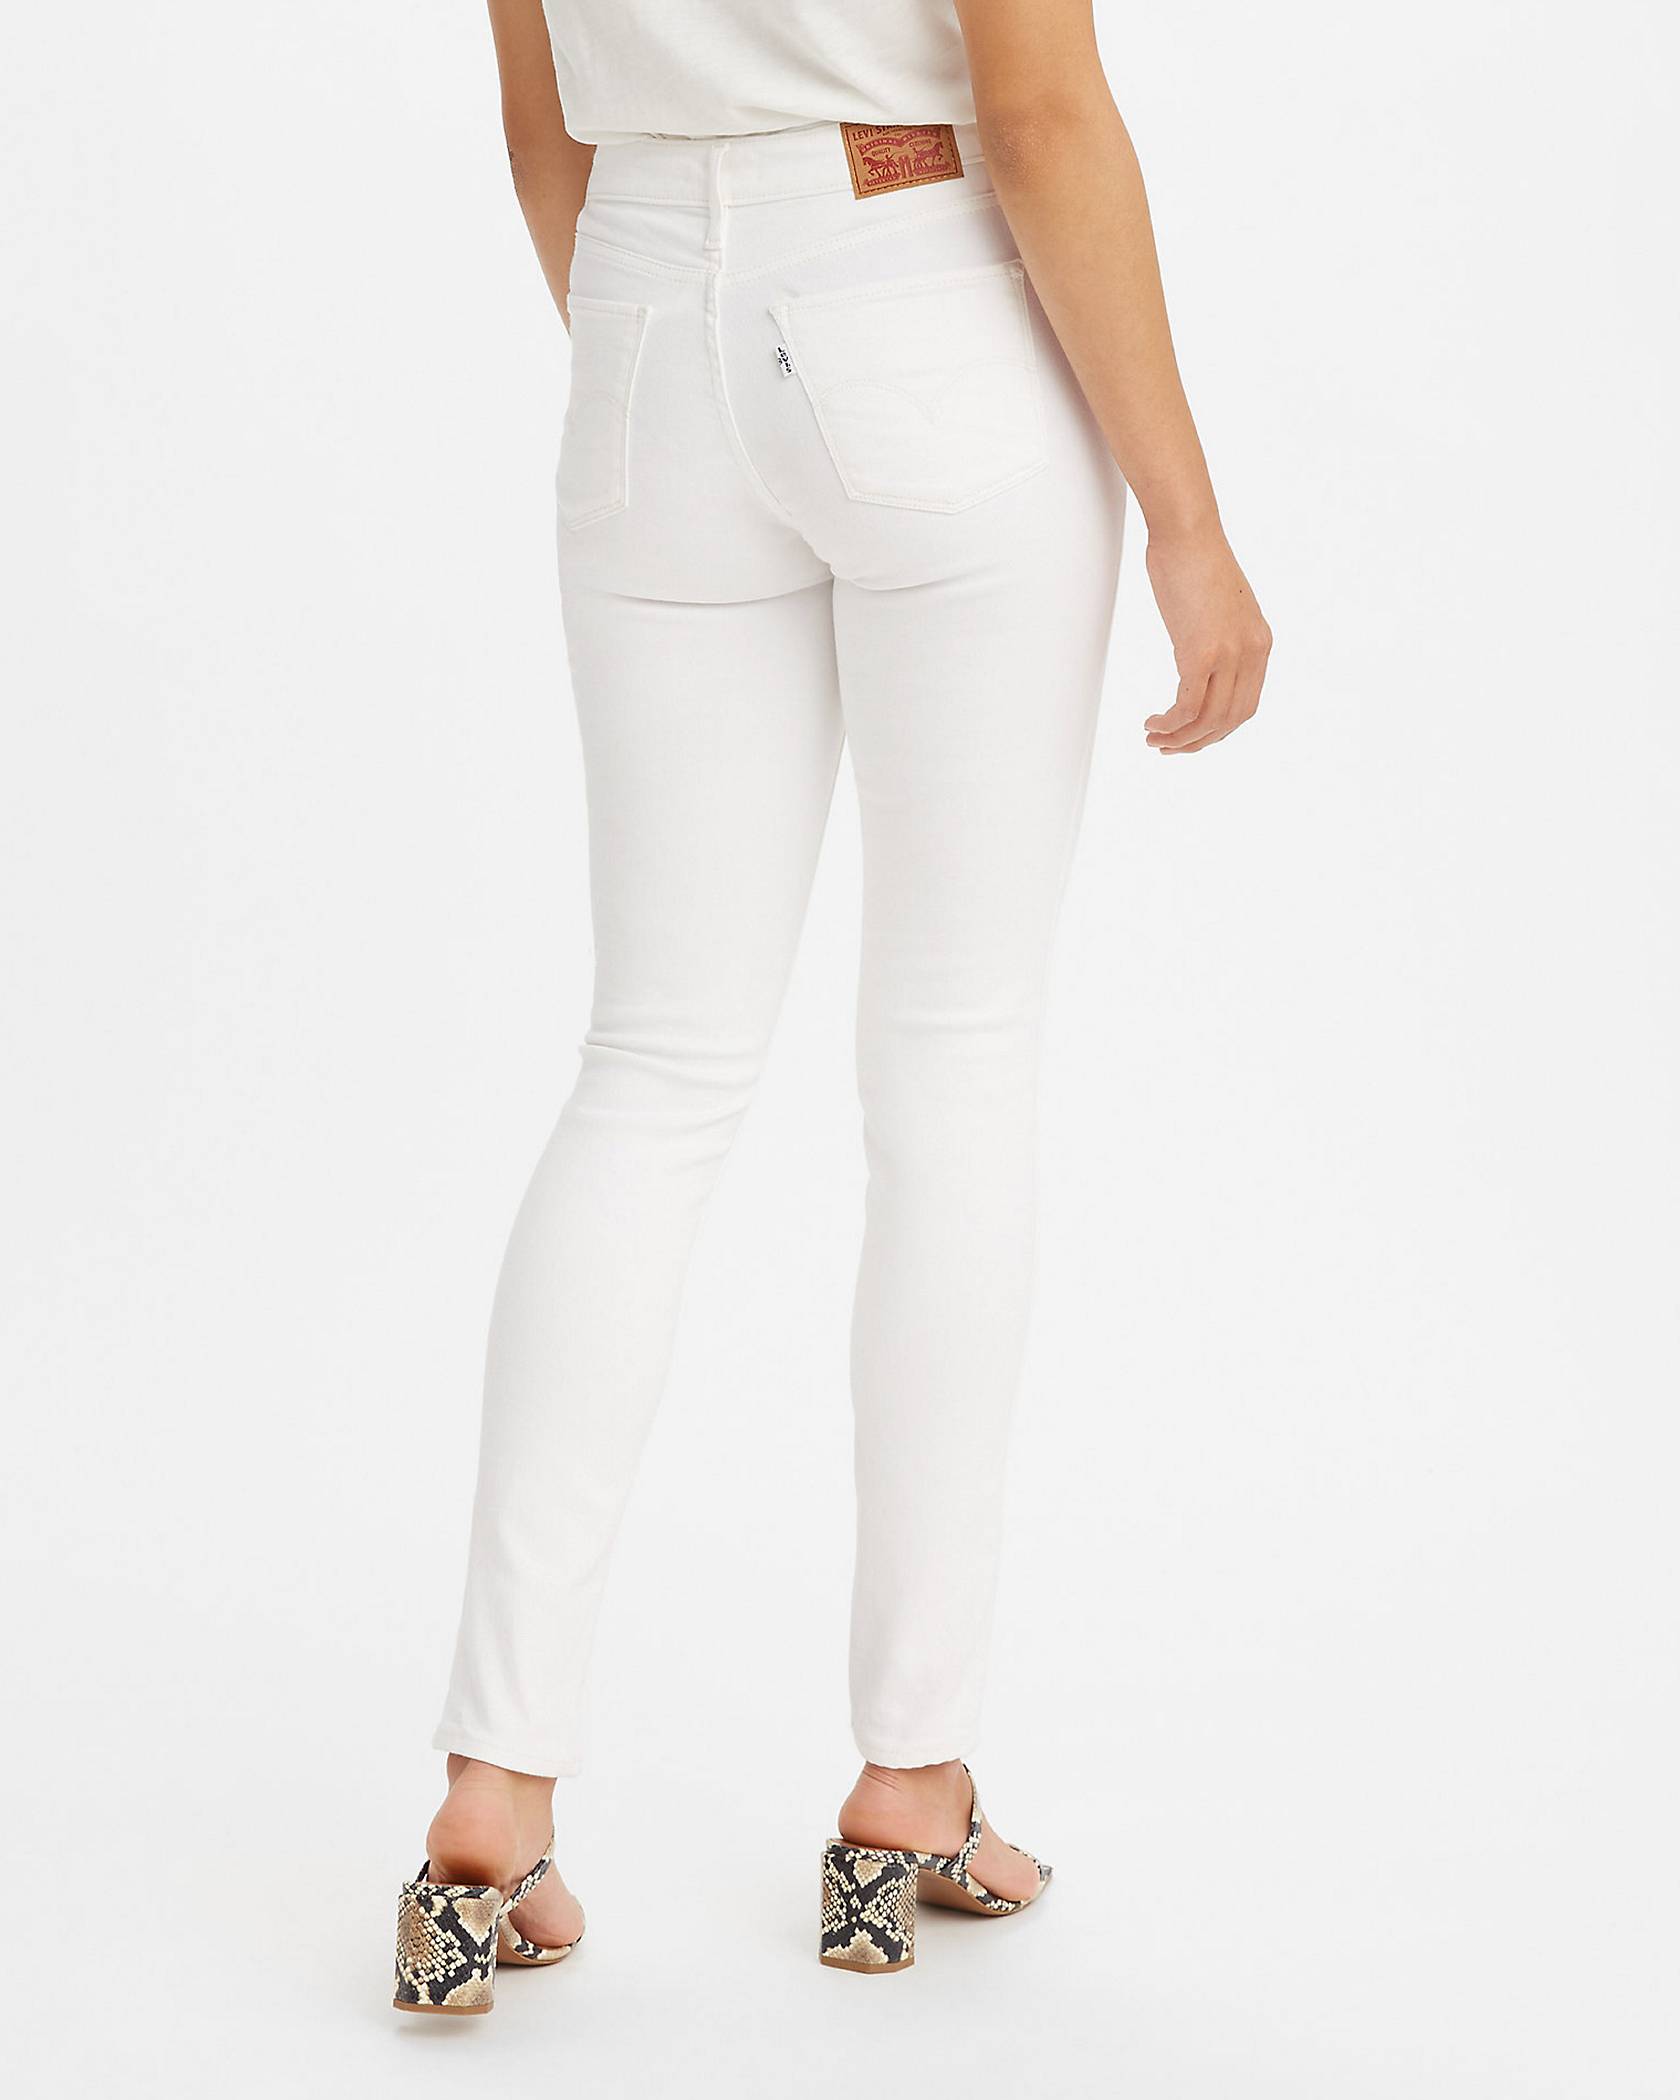 Levi white jeans, a renowned denim brand, offers a wide range of white jeans styles suitable for various occasions and preferences.